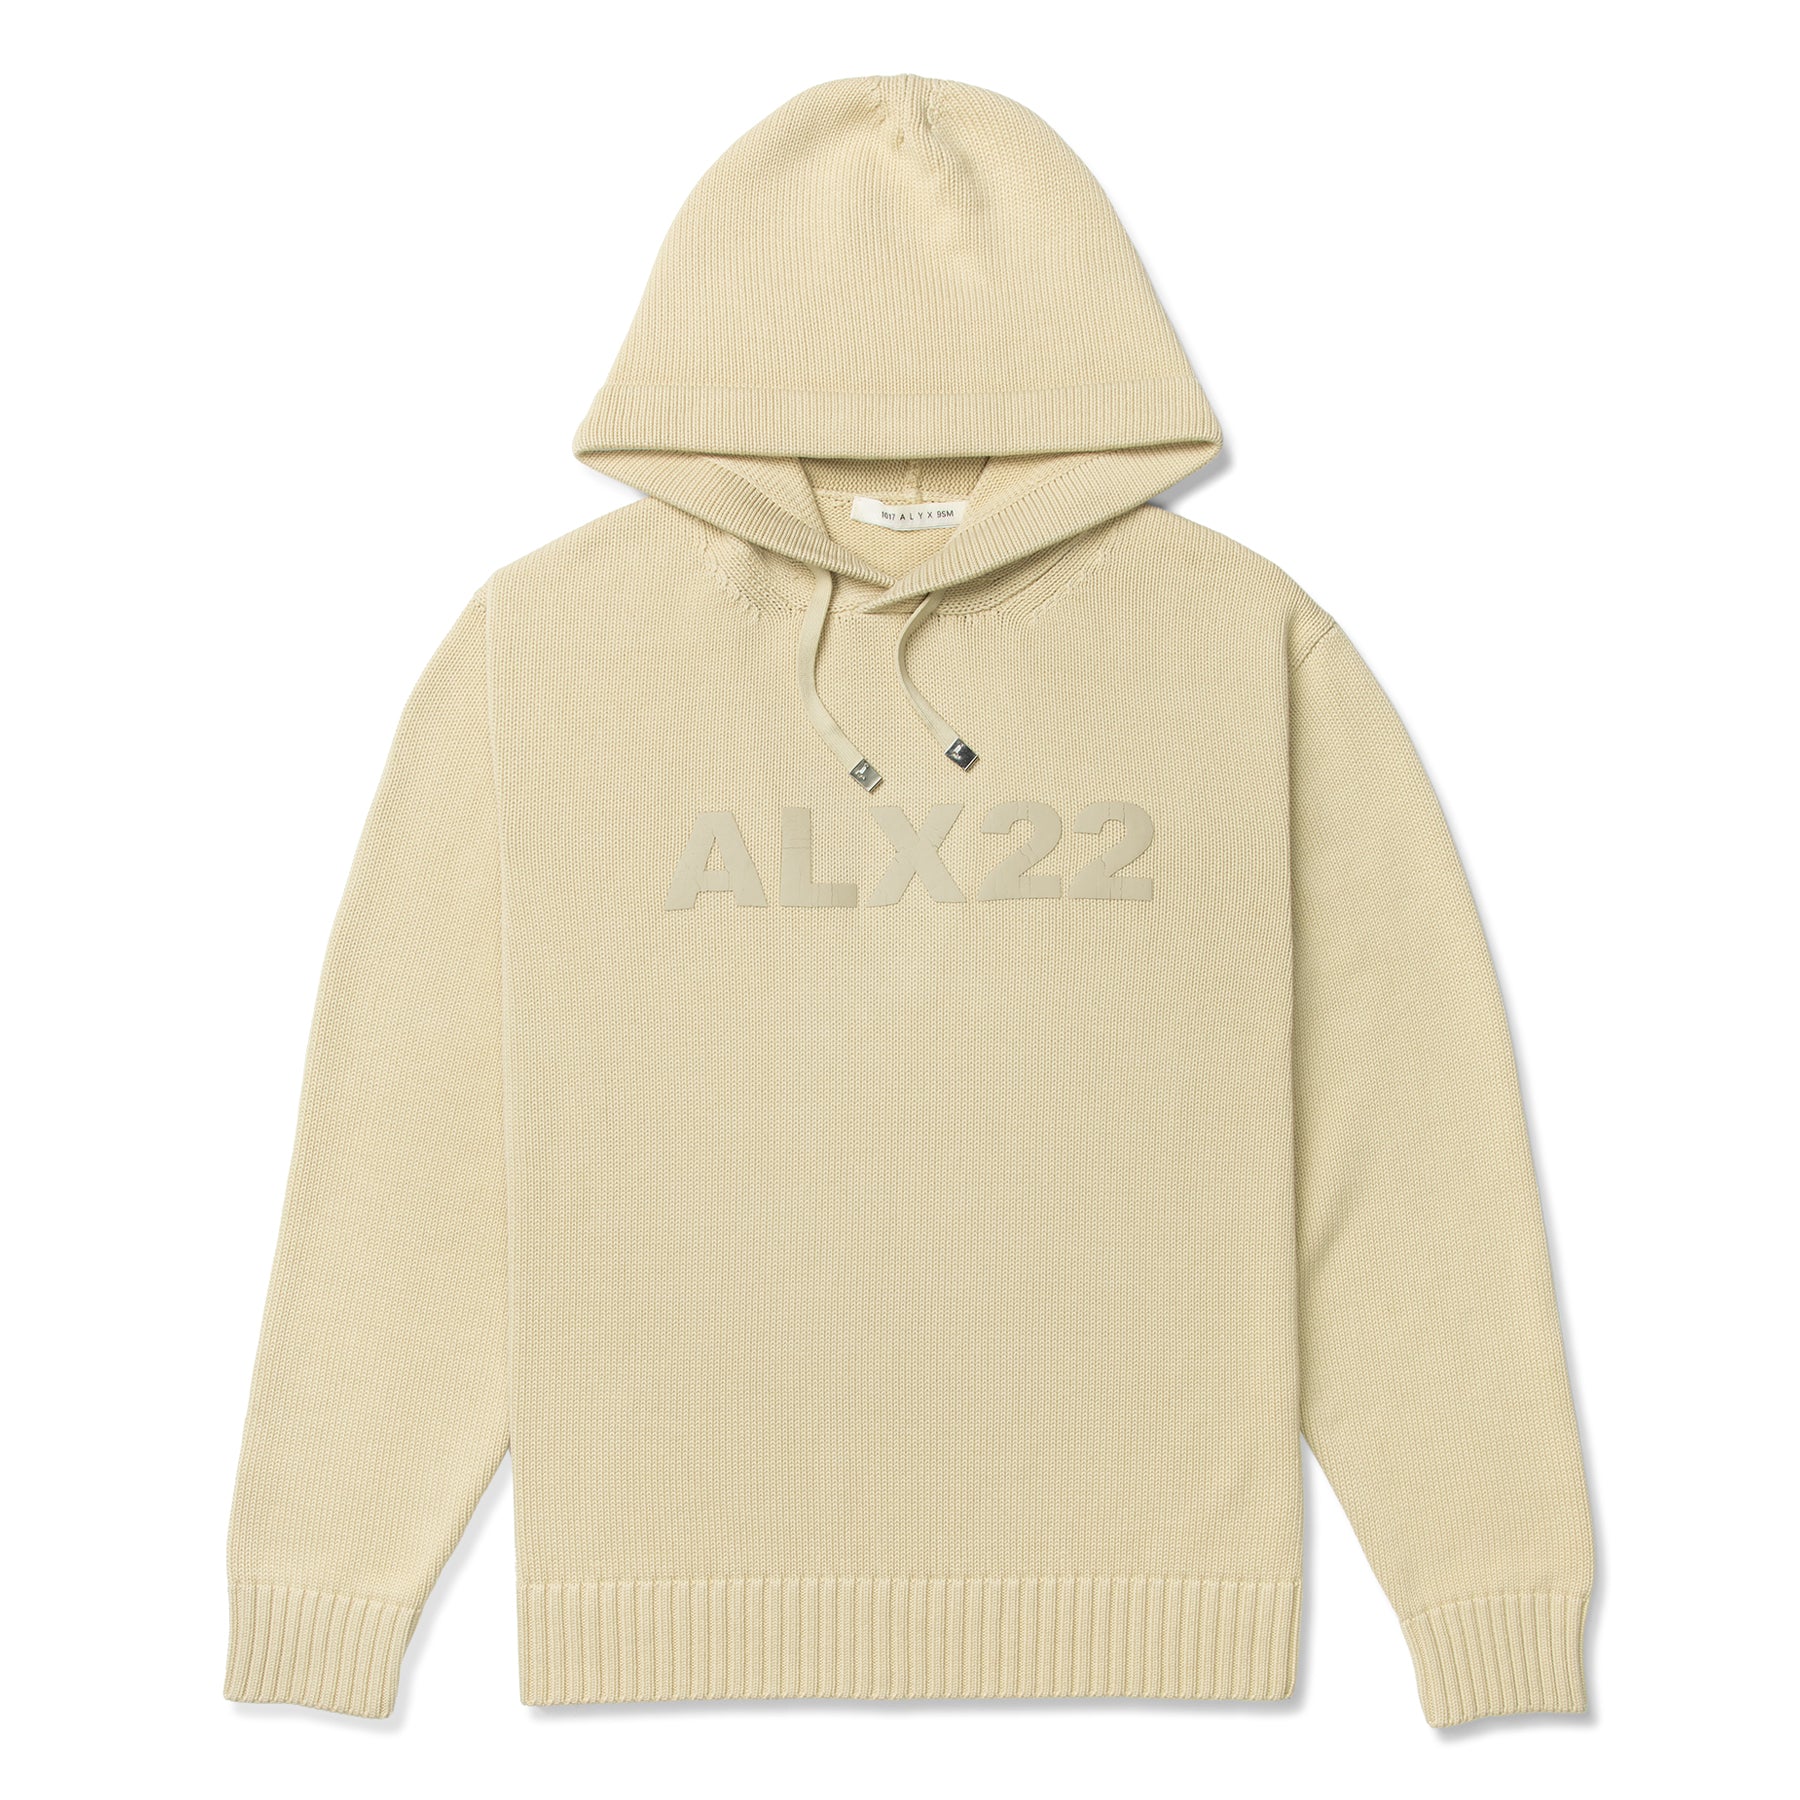 1017 ALYX 9SM Treated Logo Knit Hooded Sweater (Natural Light Beige)